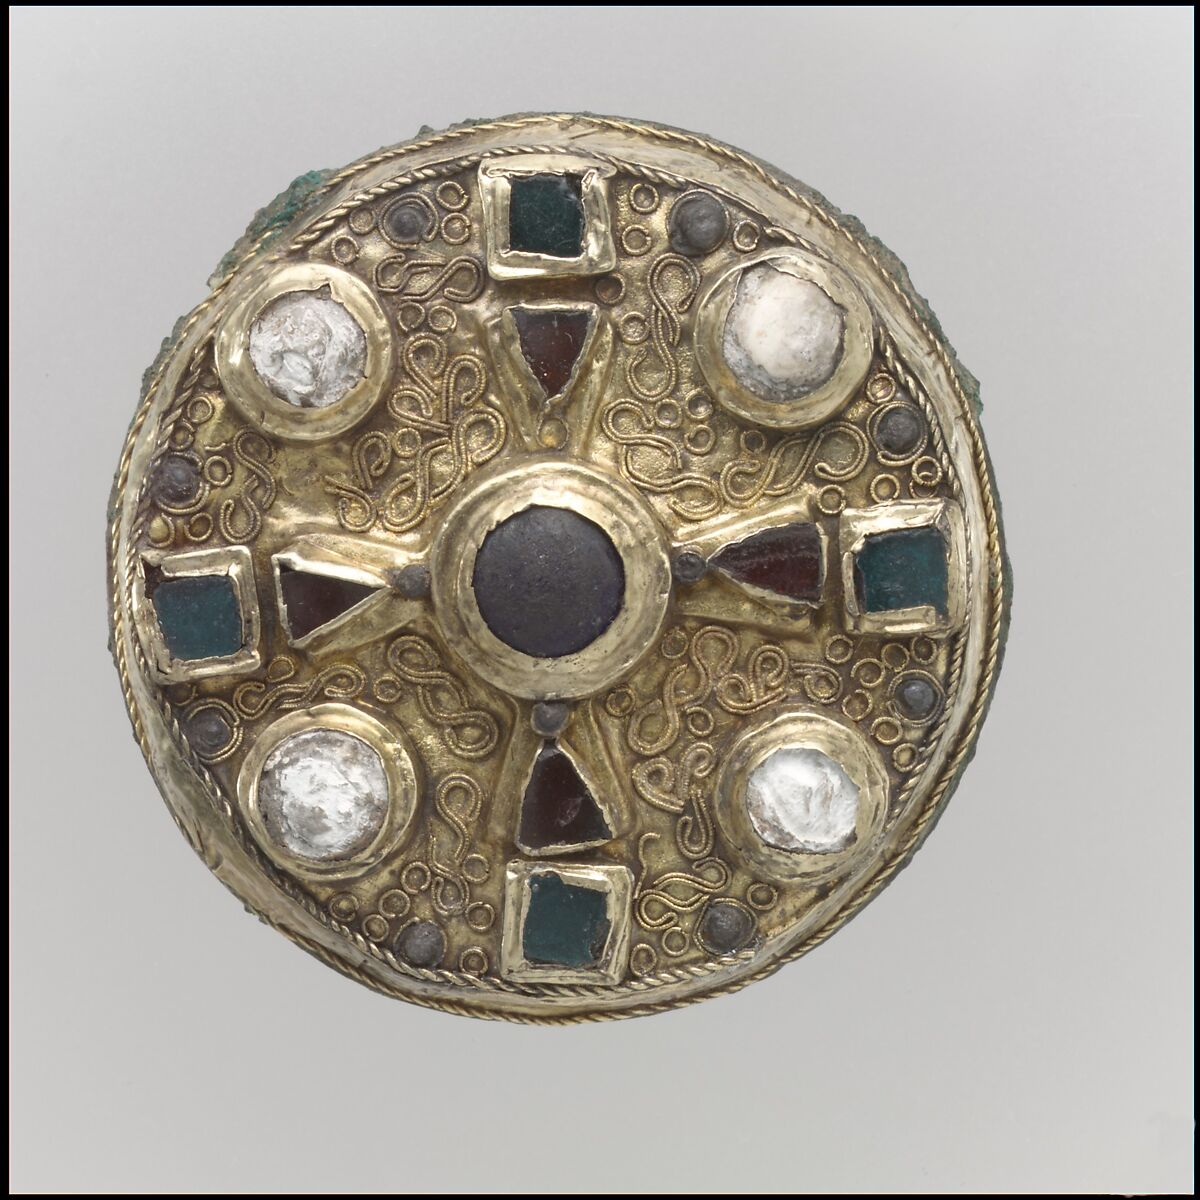 Disk Brooch, Gold sheet with copper alloy backing, and inlays of garnet, glass and calcite, Frankish 